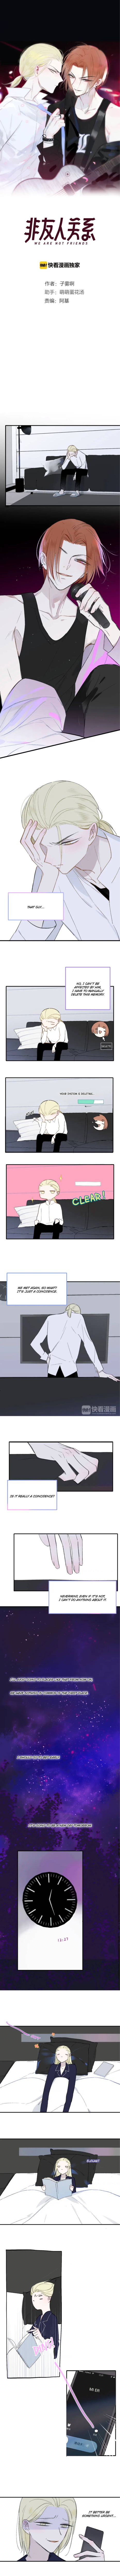 We Are Not Friends - Page 3